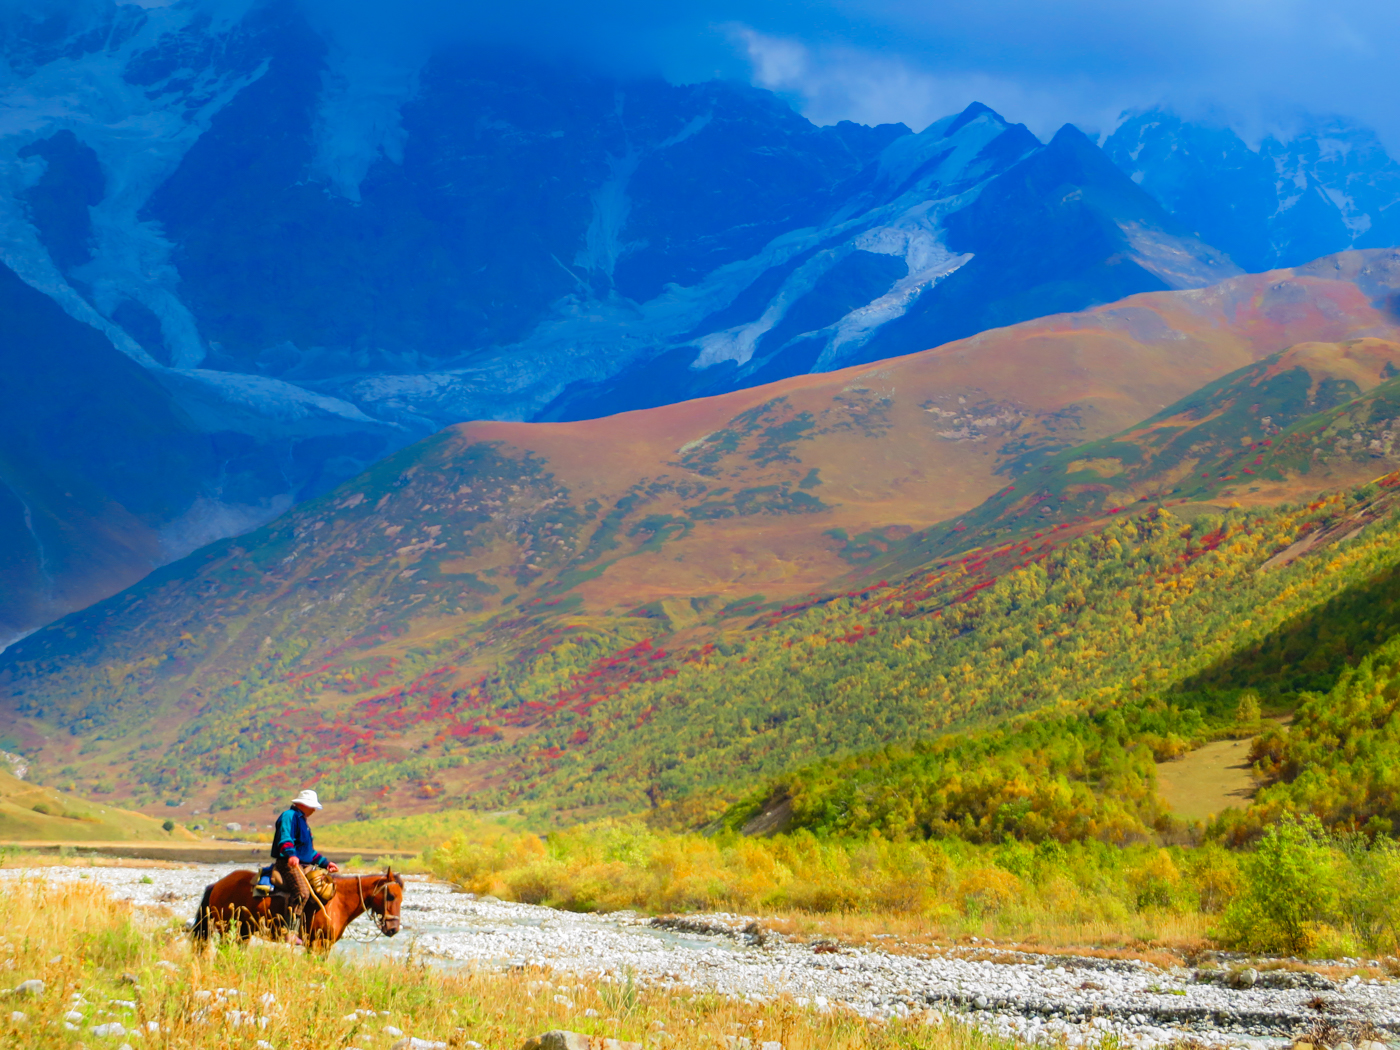 A man on a horse in the middle of the field by a river with a large glacier in the background